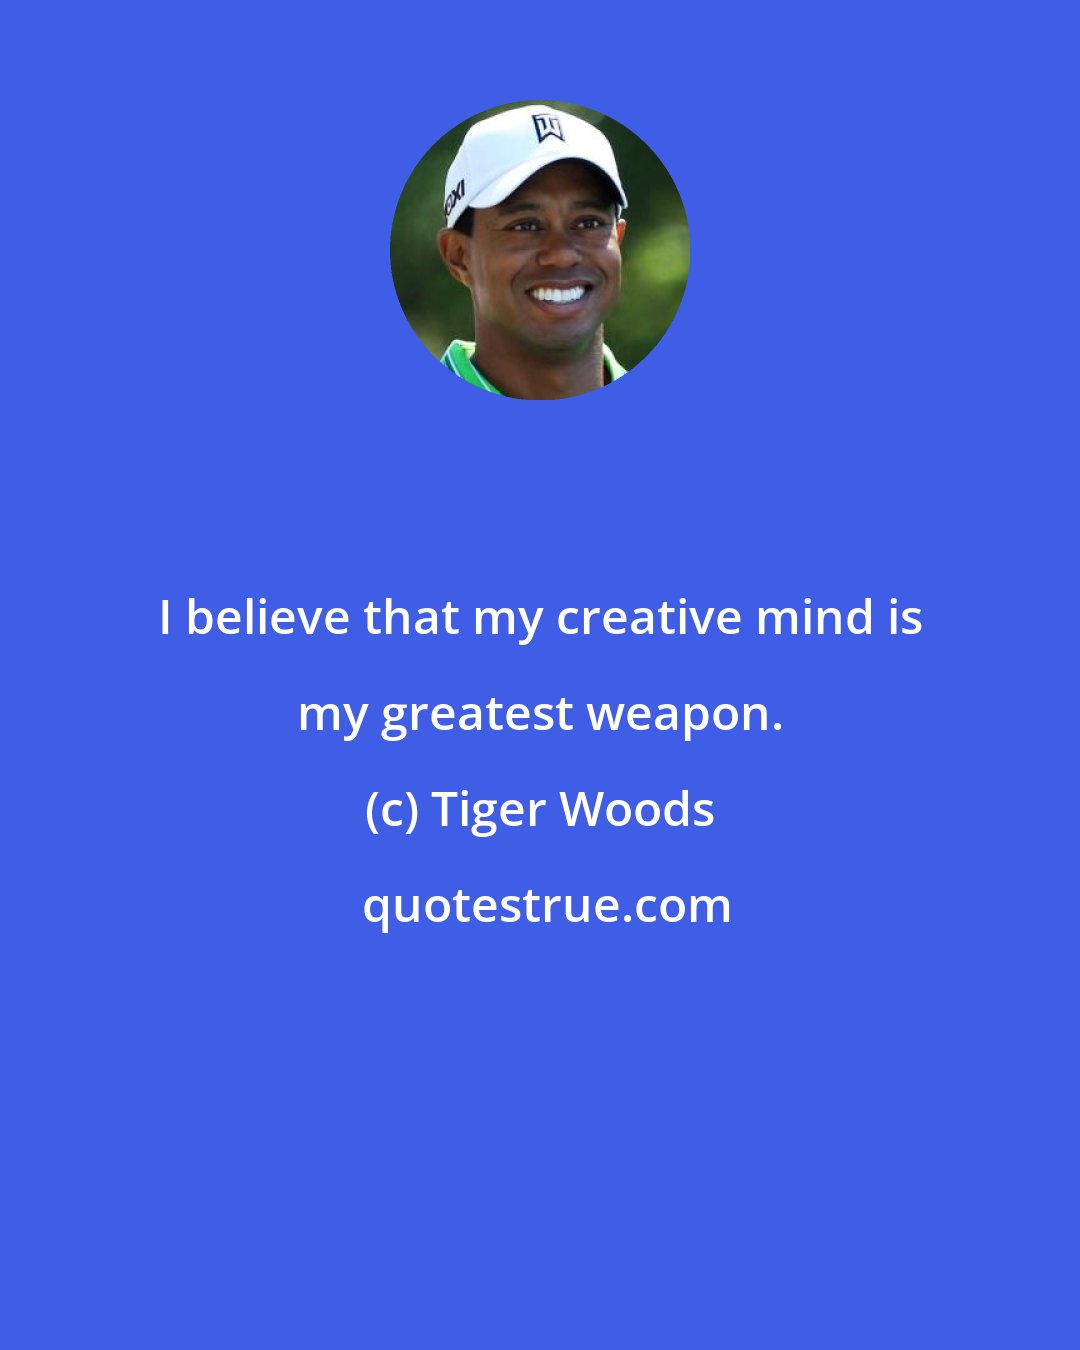 Tiger Woods: I believe that my creative mind is my greatest weapon.